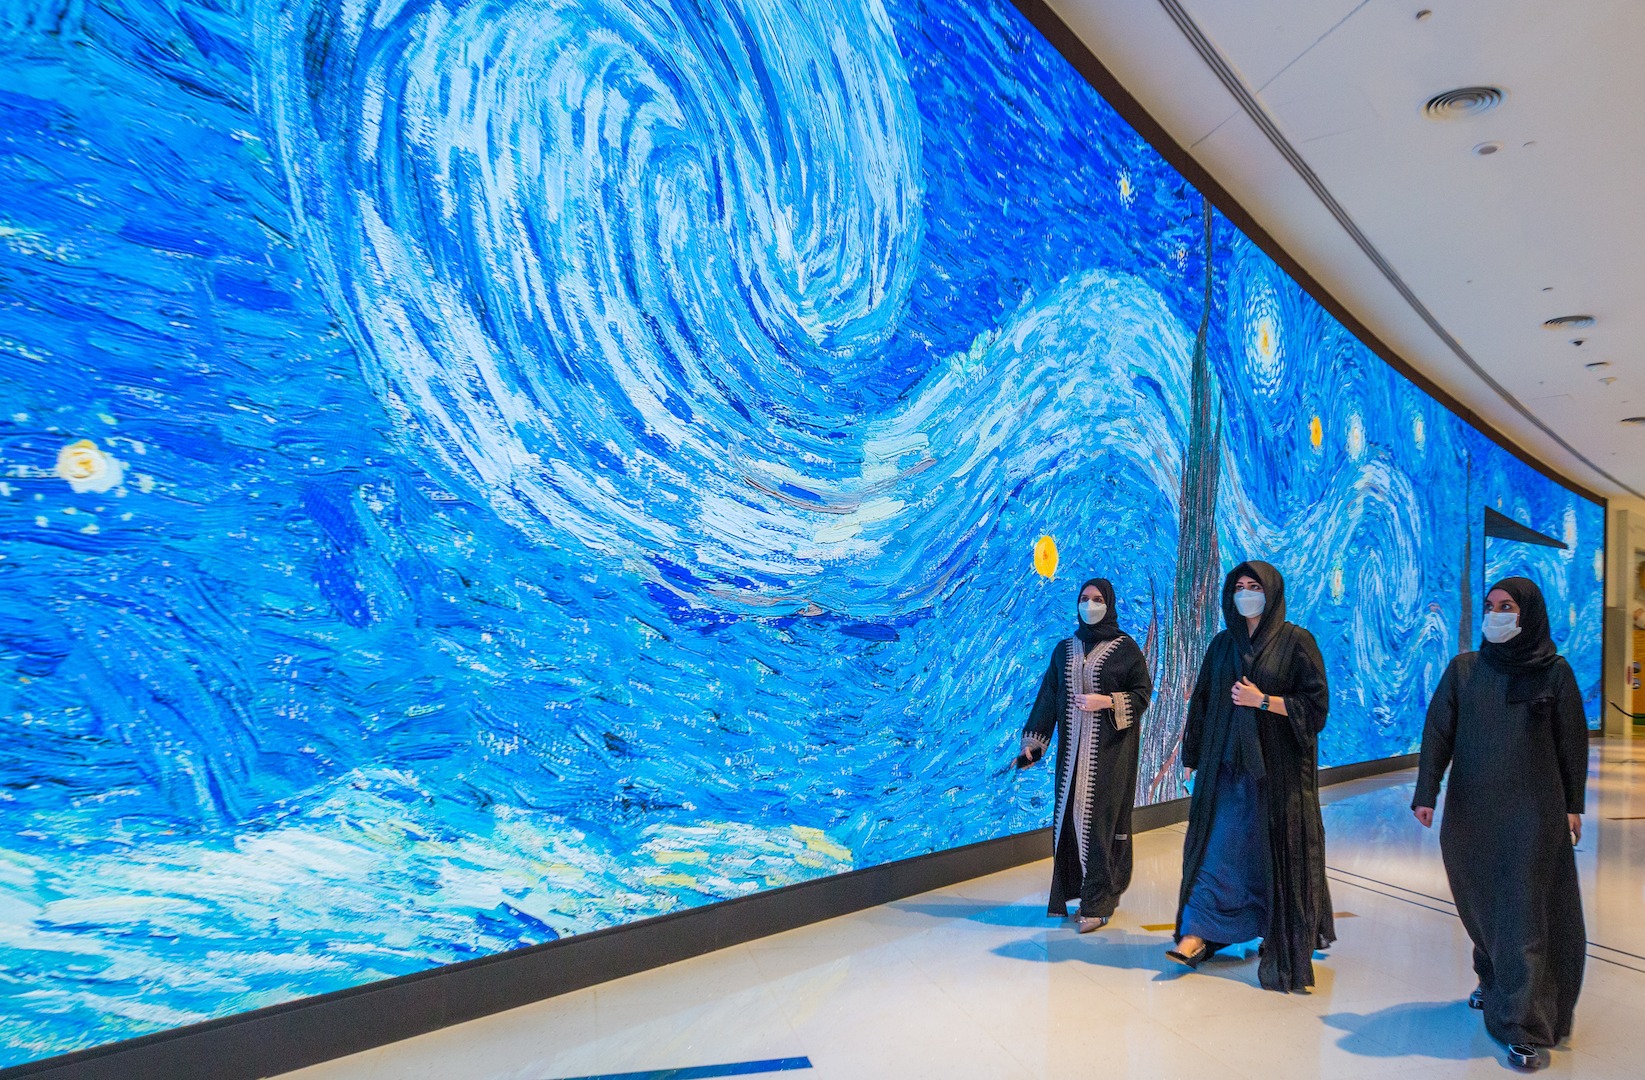 Dubai enters a new era with opening of immersive digital art centre